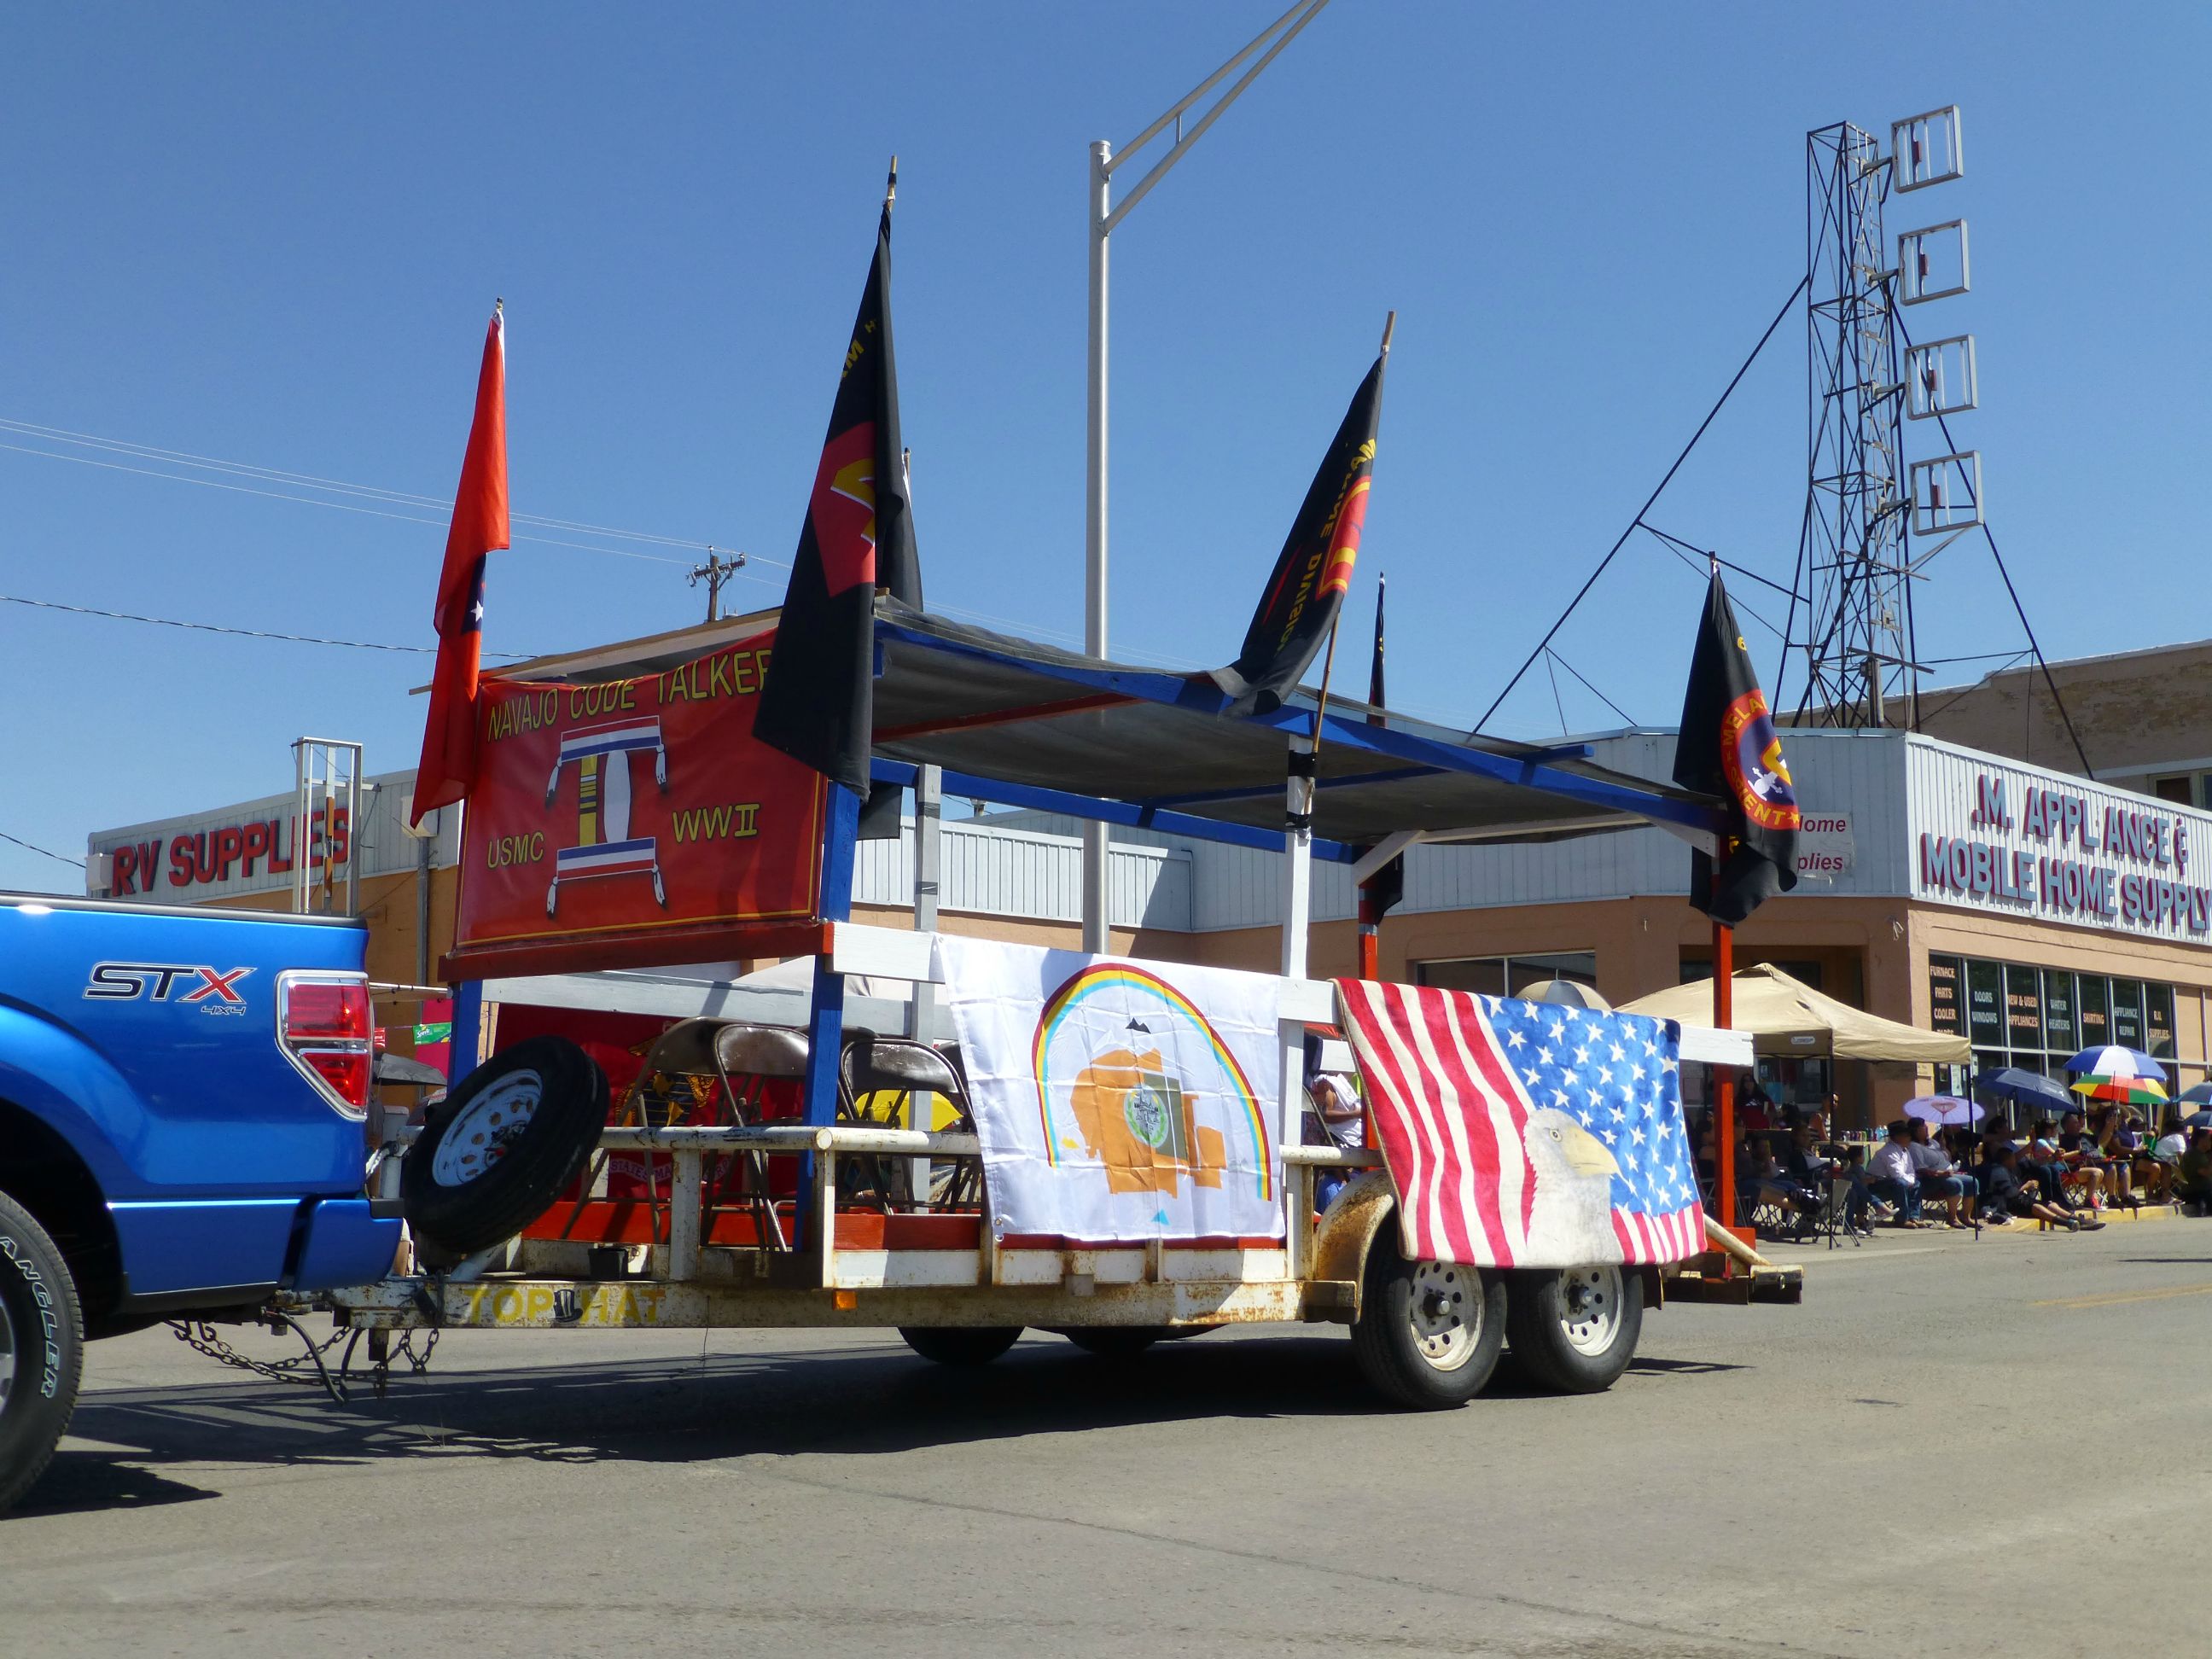 Every year, our Navajo Code Talkers graced our parade with their presence. And every year, the group of World War II Marines got smaller. This year, their float was empty.